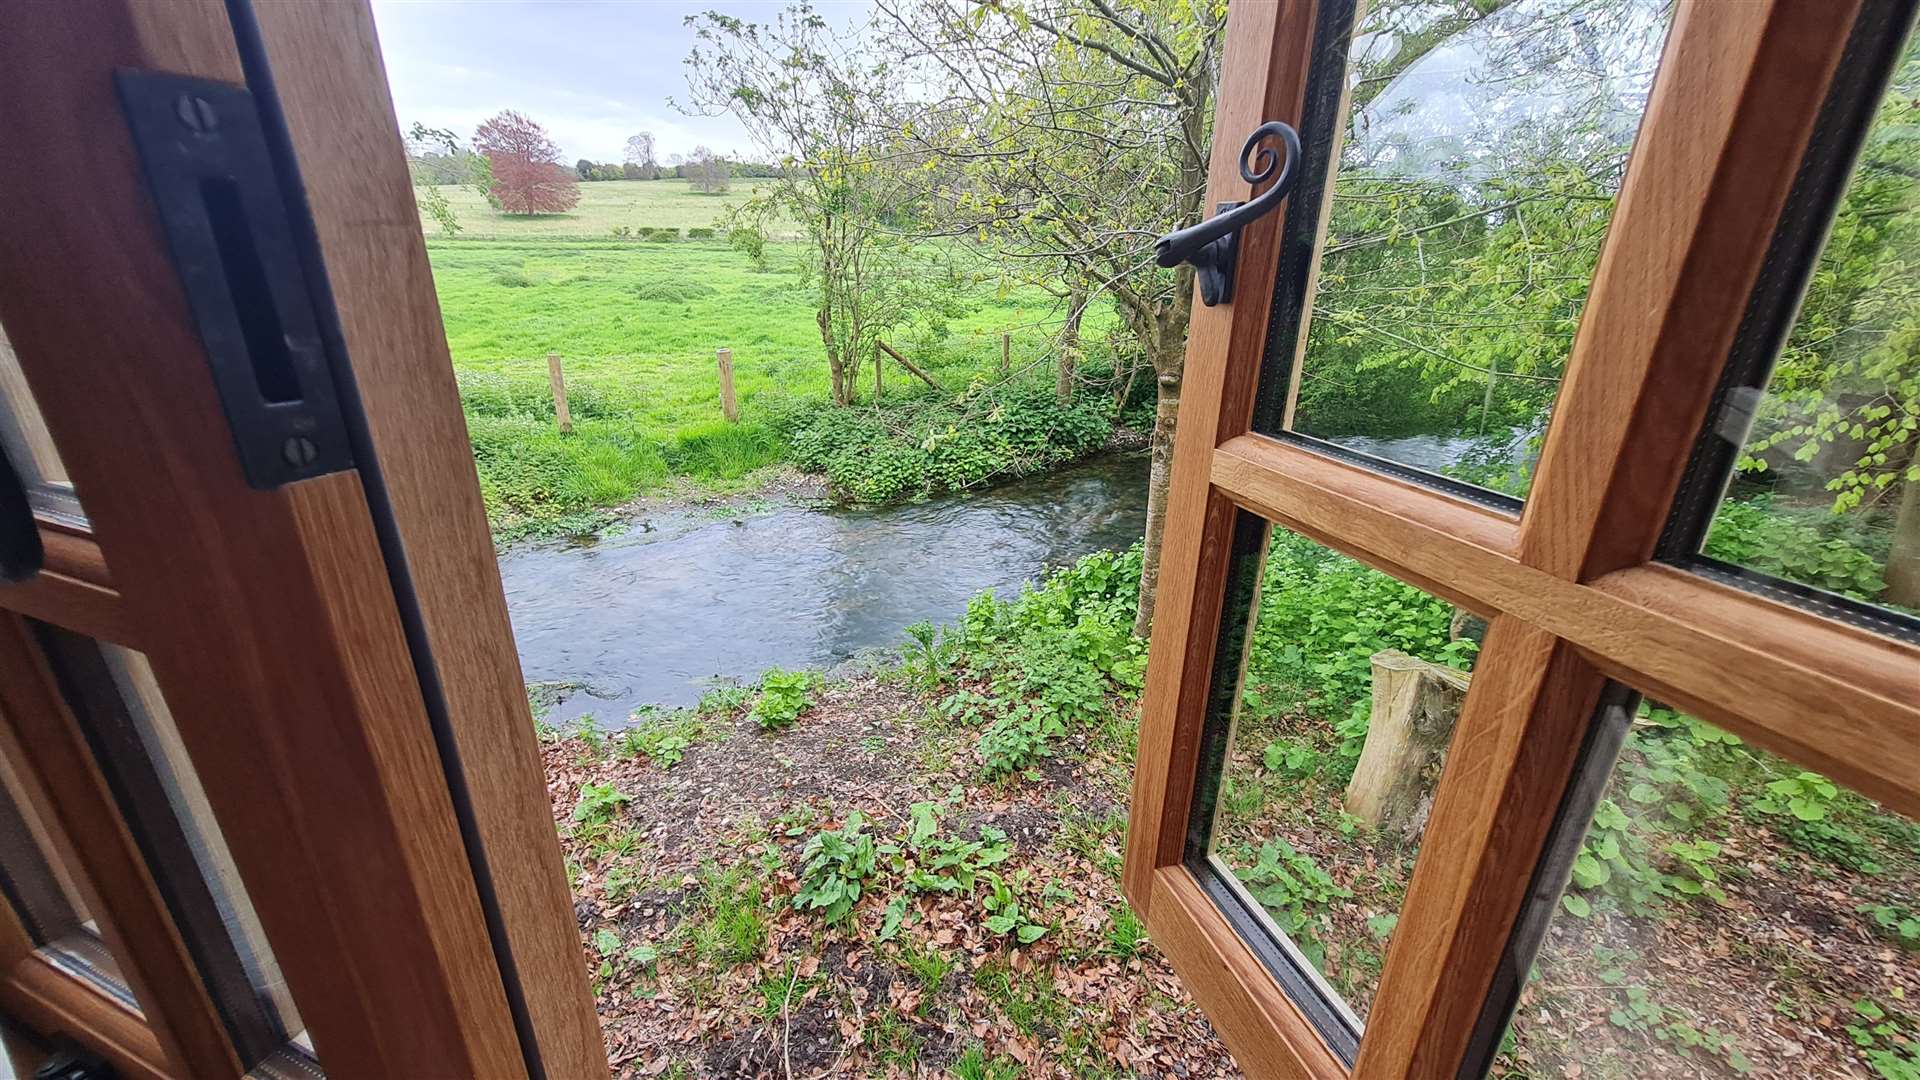 The view from the bedroom looks over a babbling brook